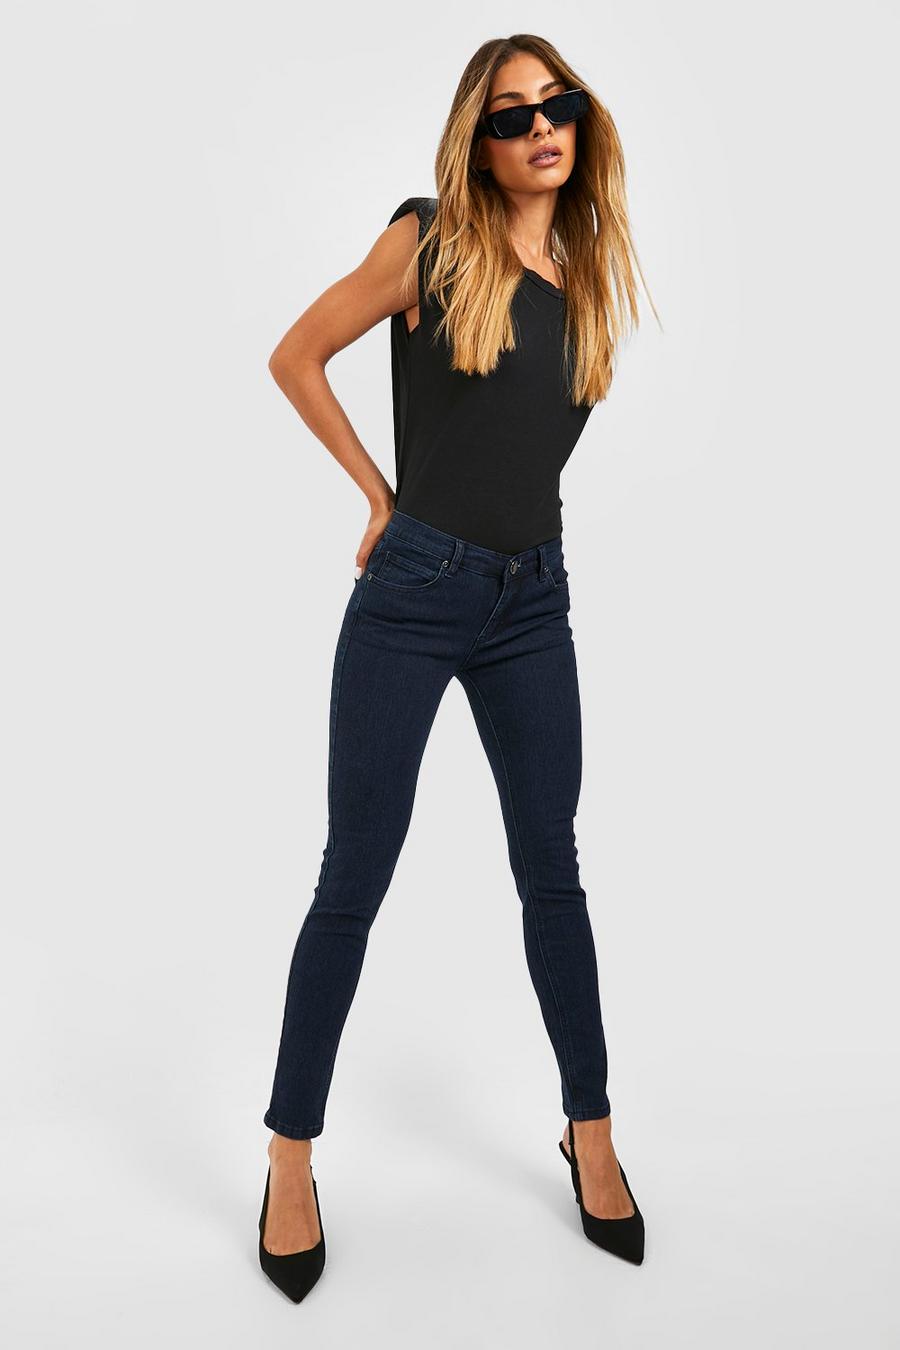 Women's Low Rise Jeans, Low waisted jeans